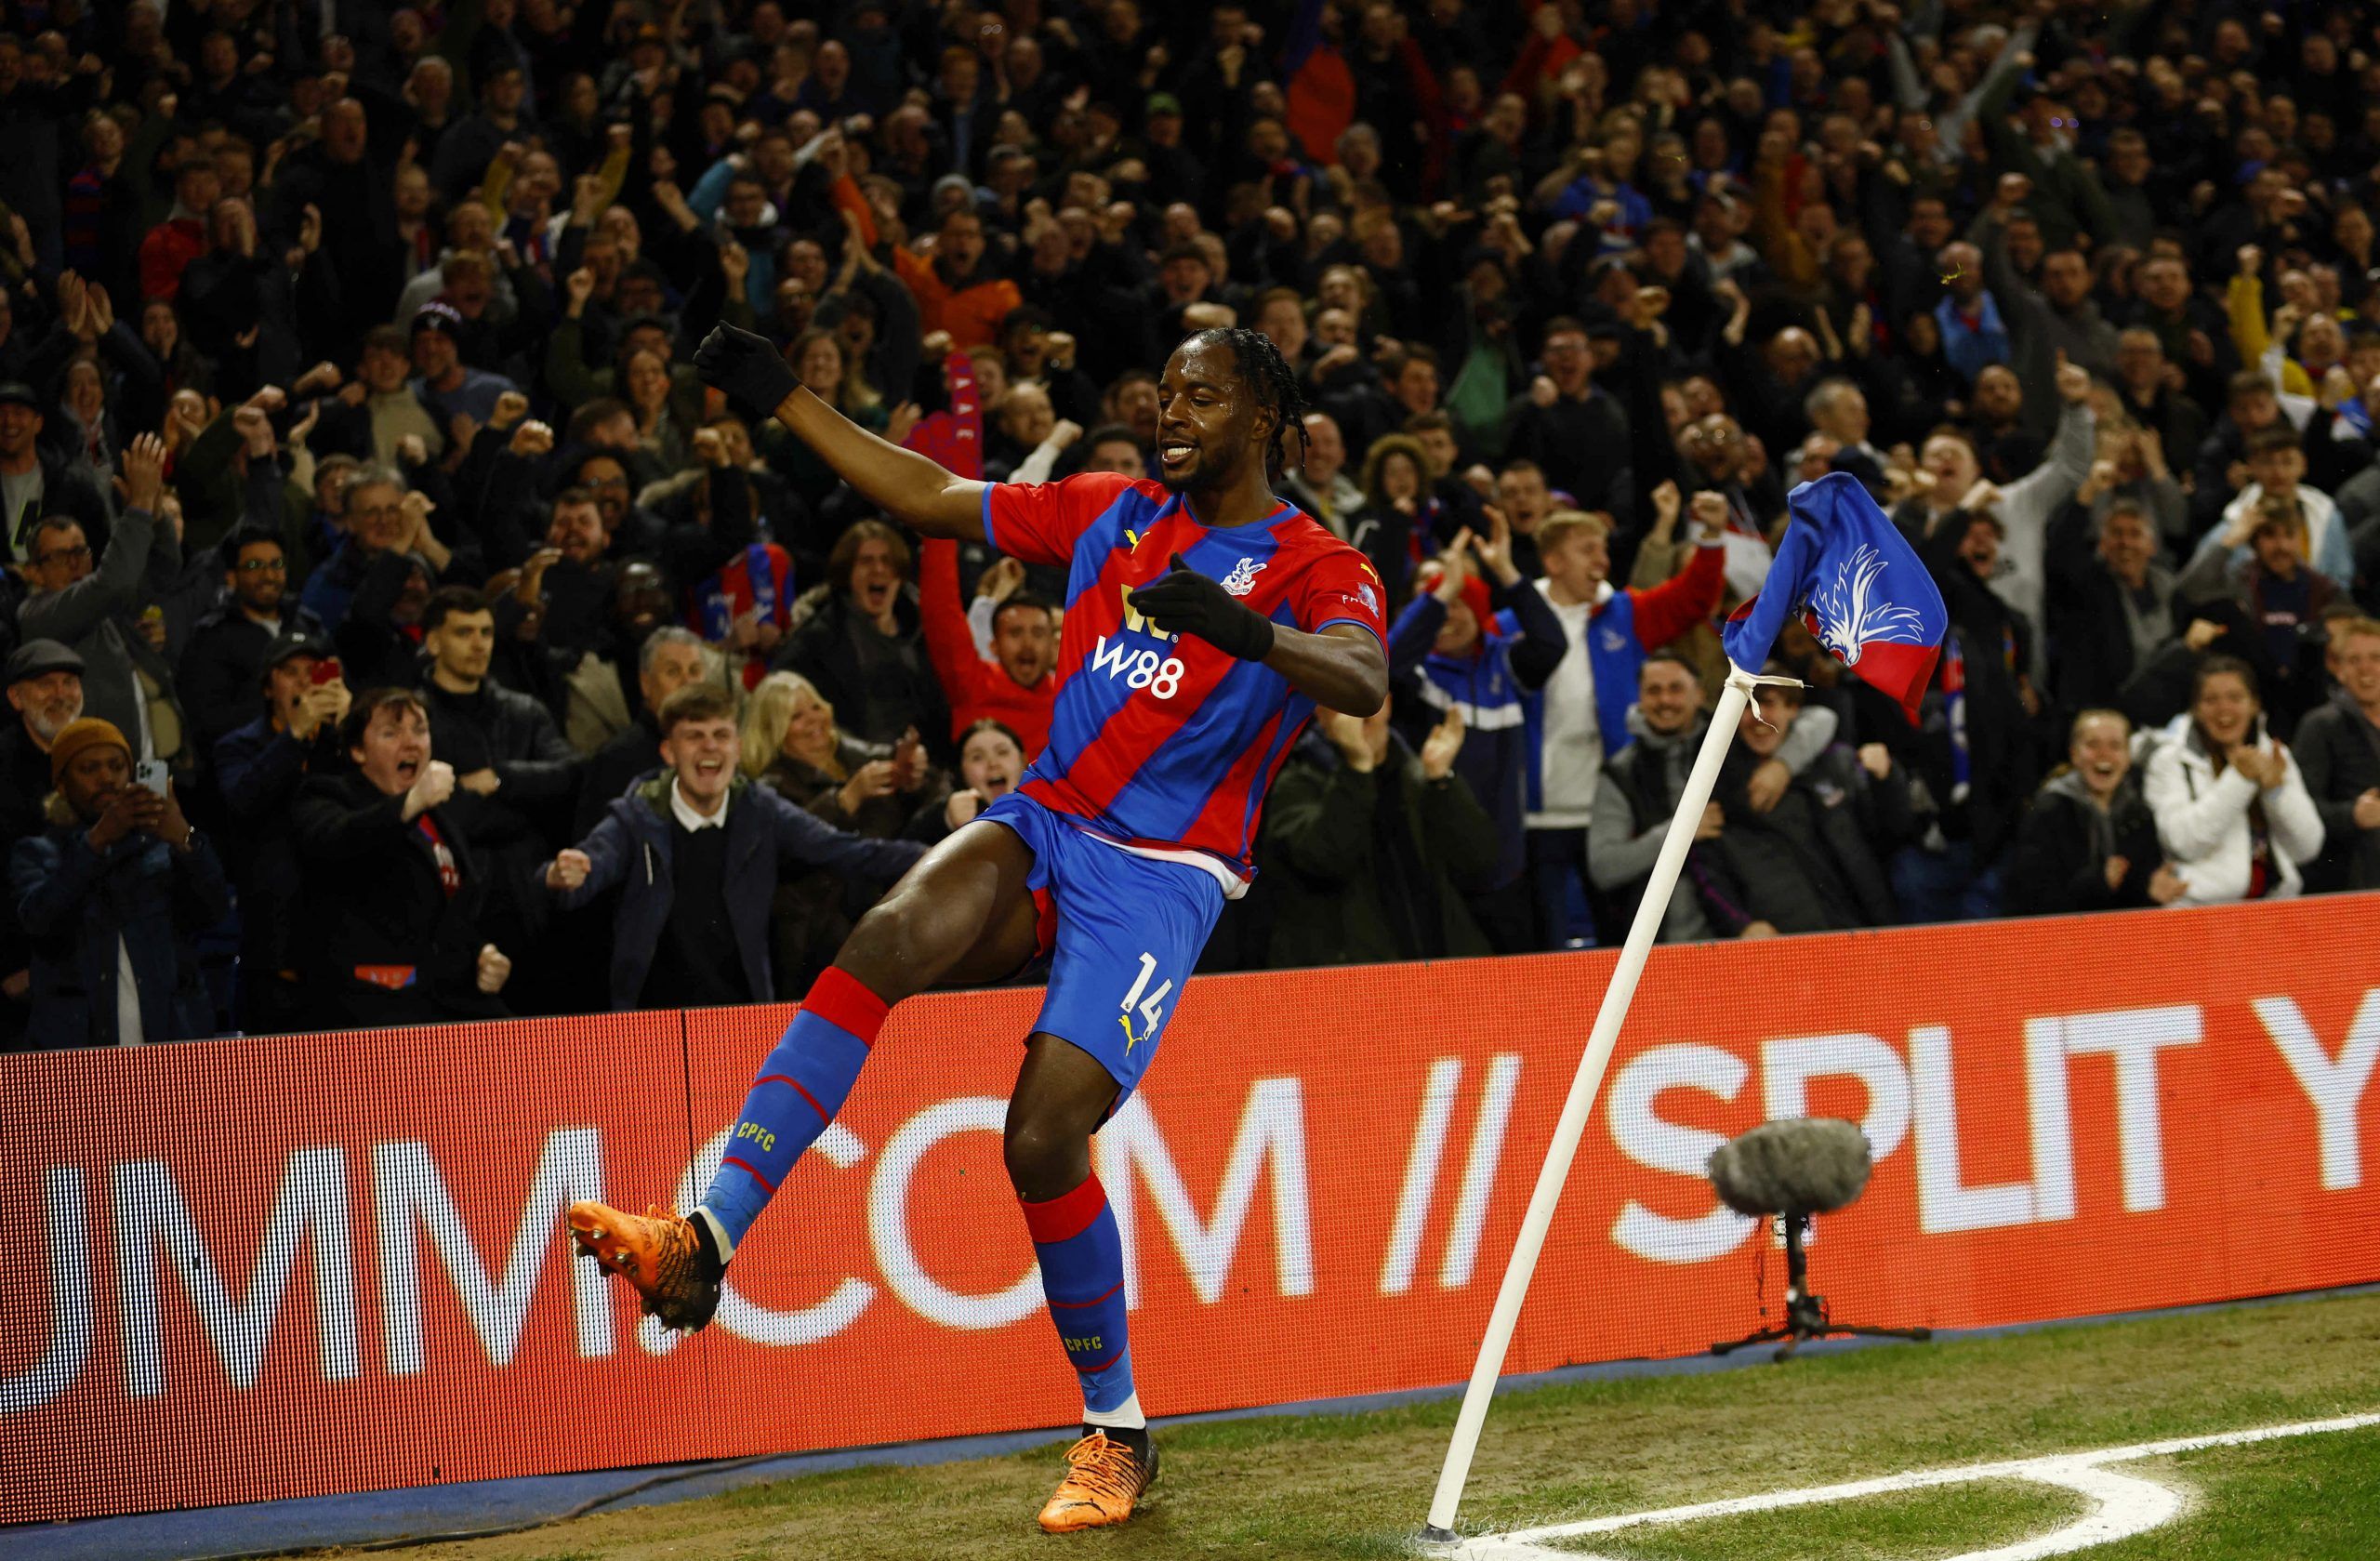 Soccer Football - Premier League - Crystal Palace v Arsenal - Selhurst Park, London, Britain - April 4, 2022 Crystal Palace's Jean-Philippe Mateta celebrates scoring their first goal Action Images via Reuters/Andrew Boyers EDITORIAL USE ONLY. No use with unauthorized audio, video, data, fixture lists, club/league logos or 'live' services. Online in-match use limited to 75 images, no video emulation. No use in betting, games or single club /league/player publications.  Please contact your account